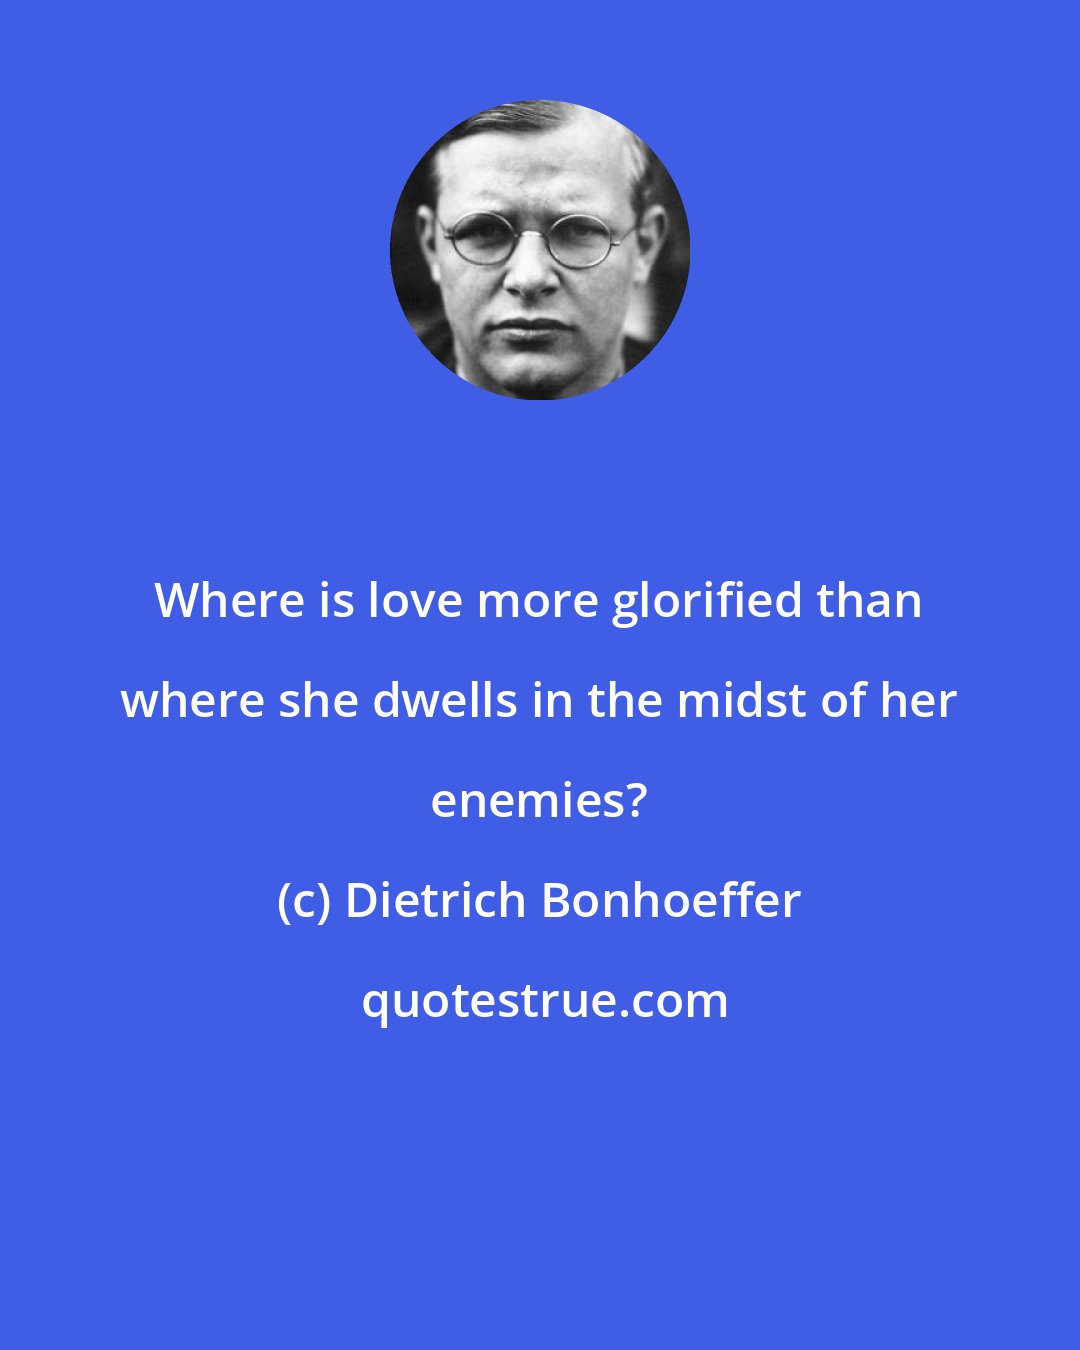 Dietrich Bonhoeffer: Where is love more glorified than where she dwells in the midst of her enemies?